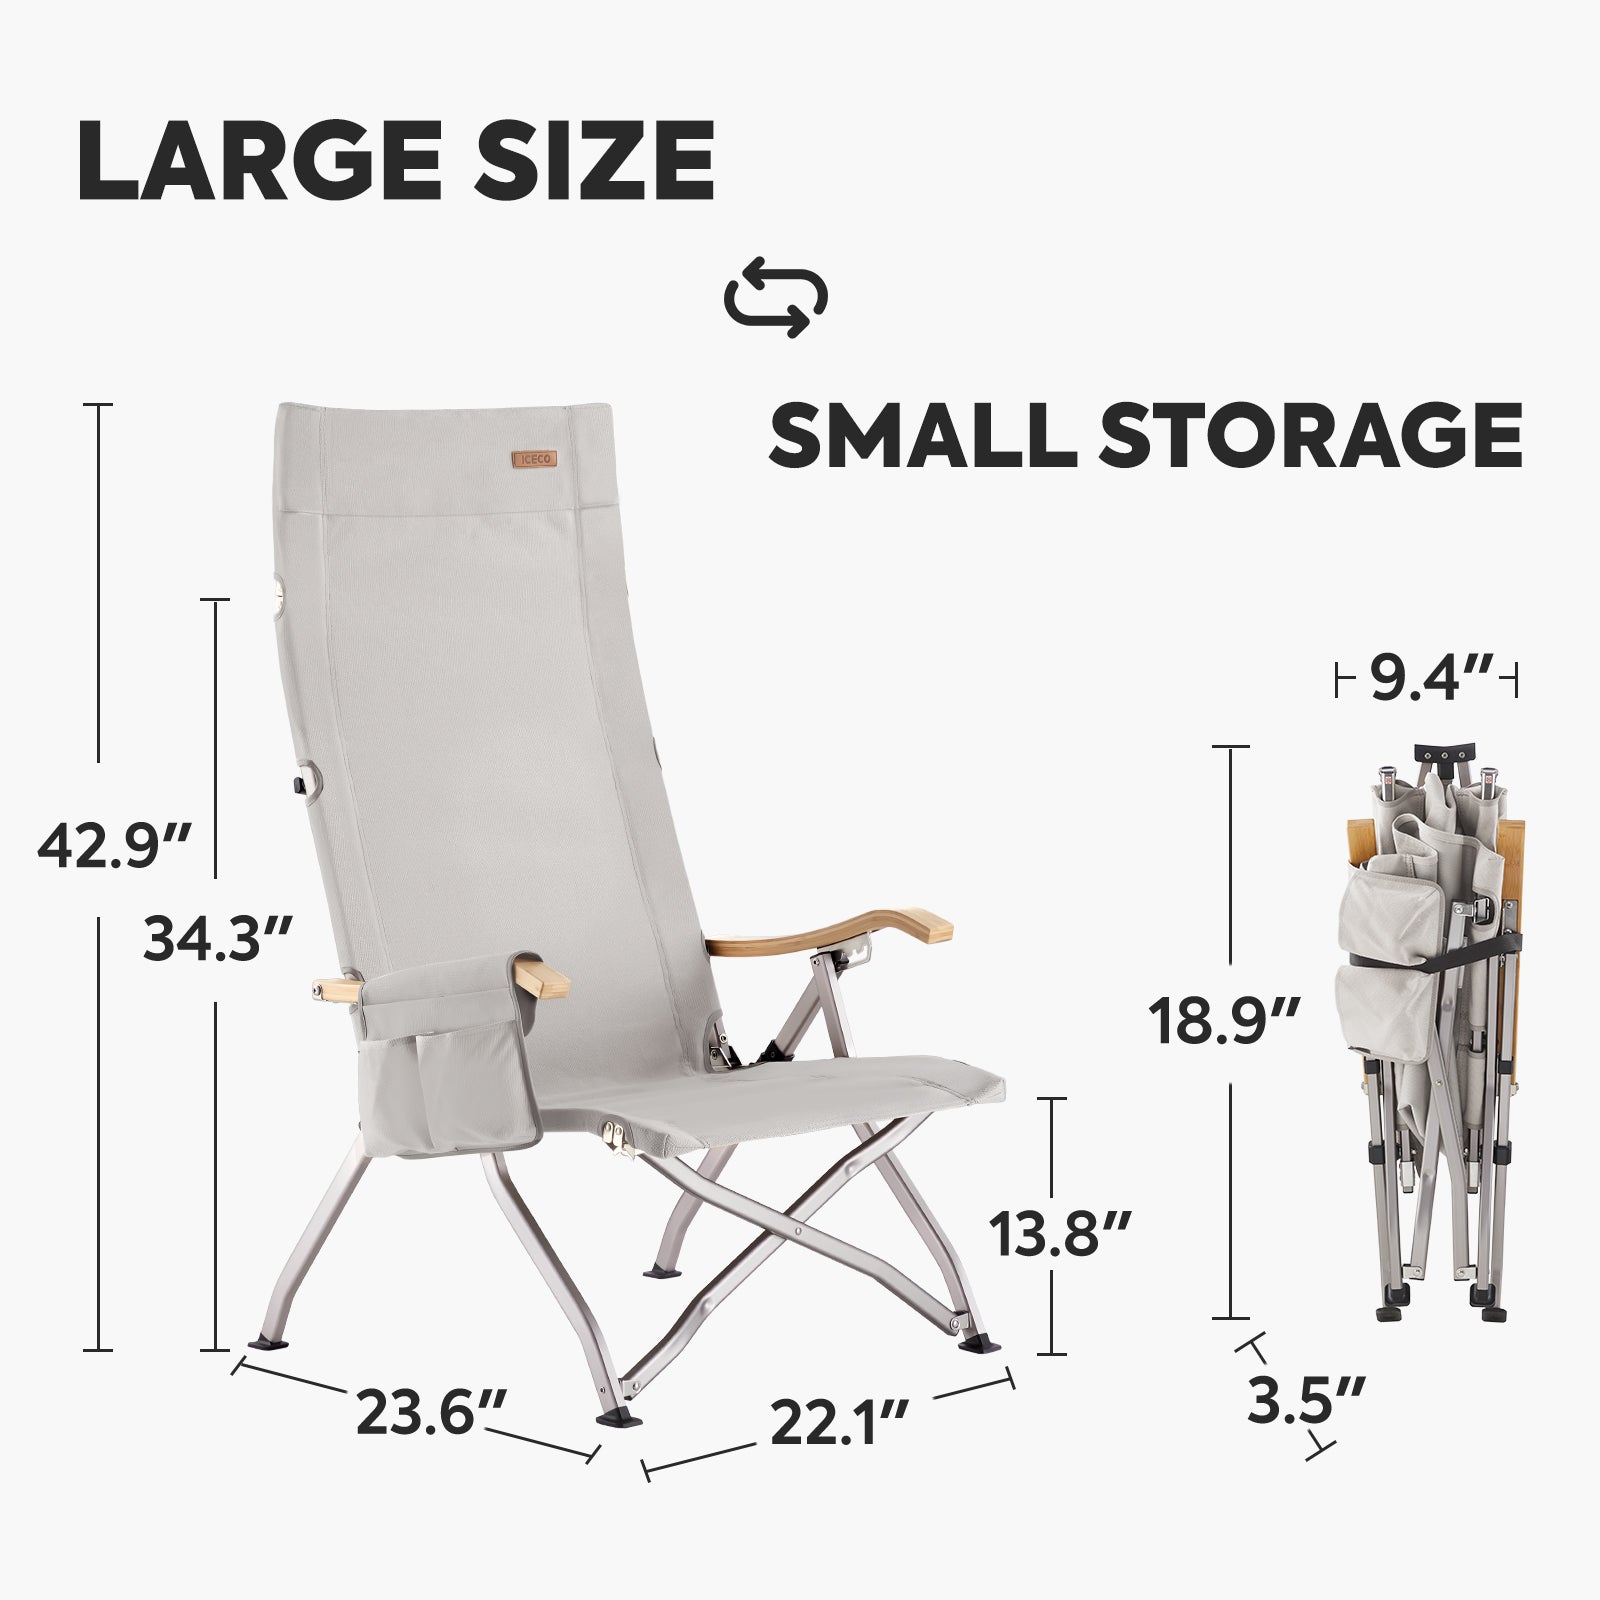 Ha1600L 4 Positions Adjustable Camping Chairs for Adults-Outdoor Gear-www.icecofreezer.com